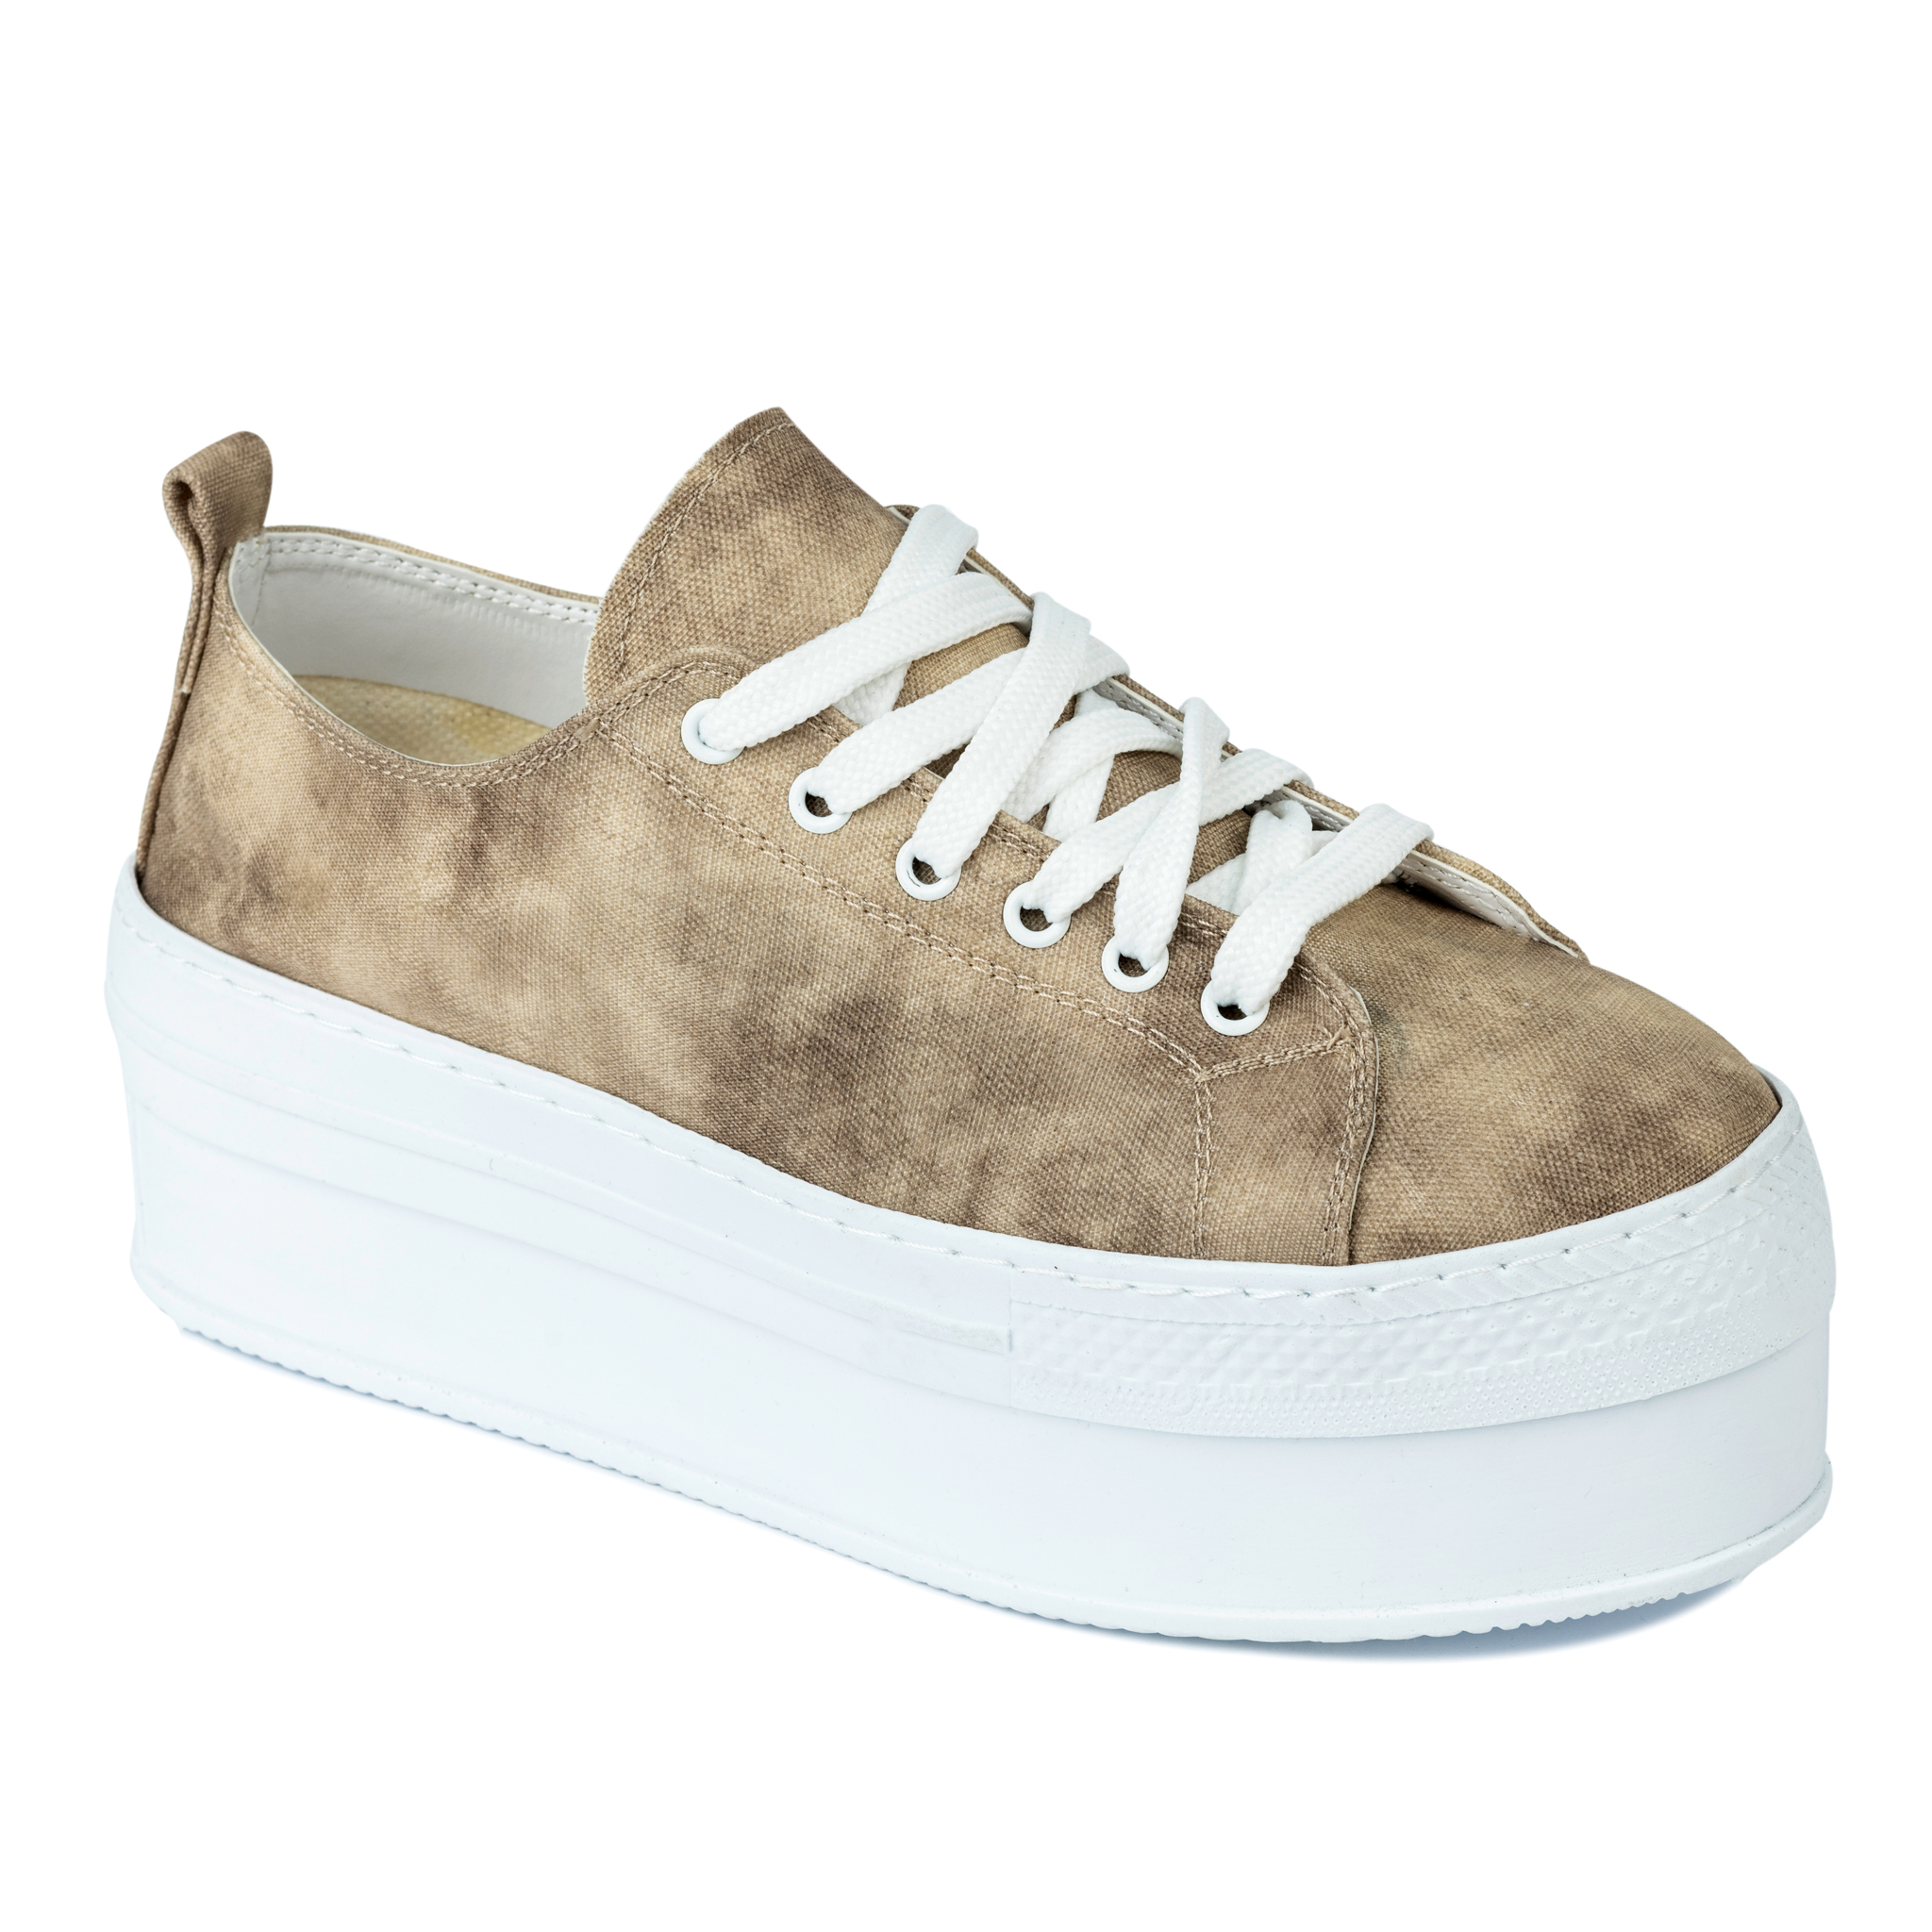 SHALLOW SNEAKERS WITH HIGH SOLE - BEIGE